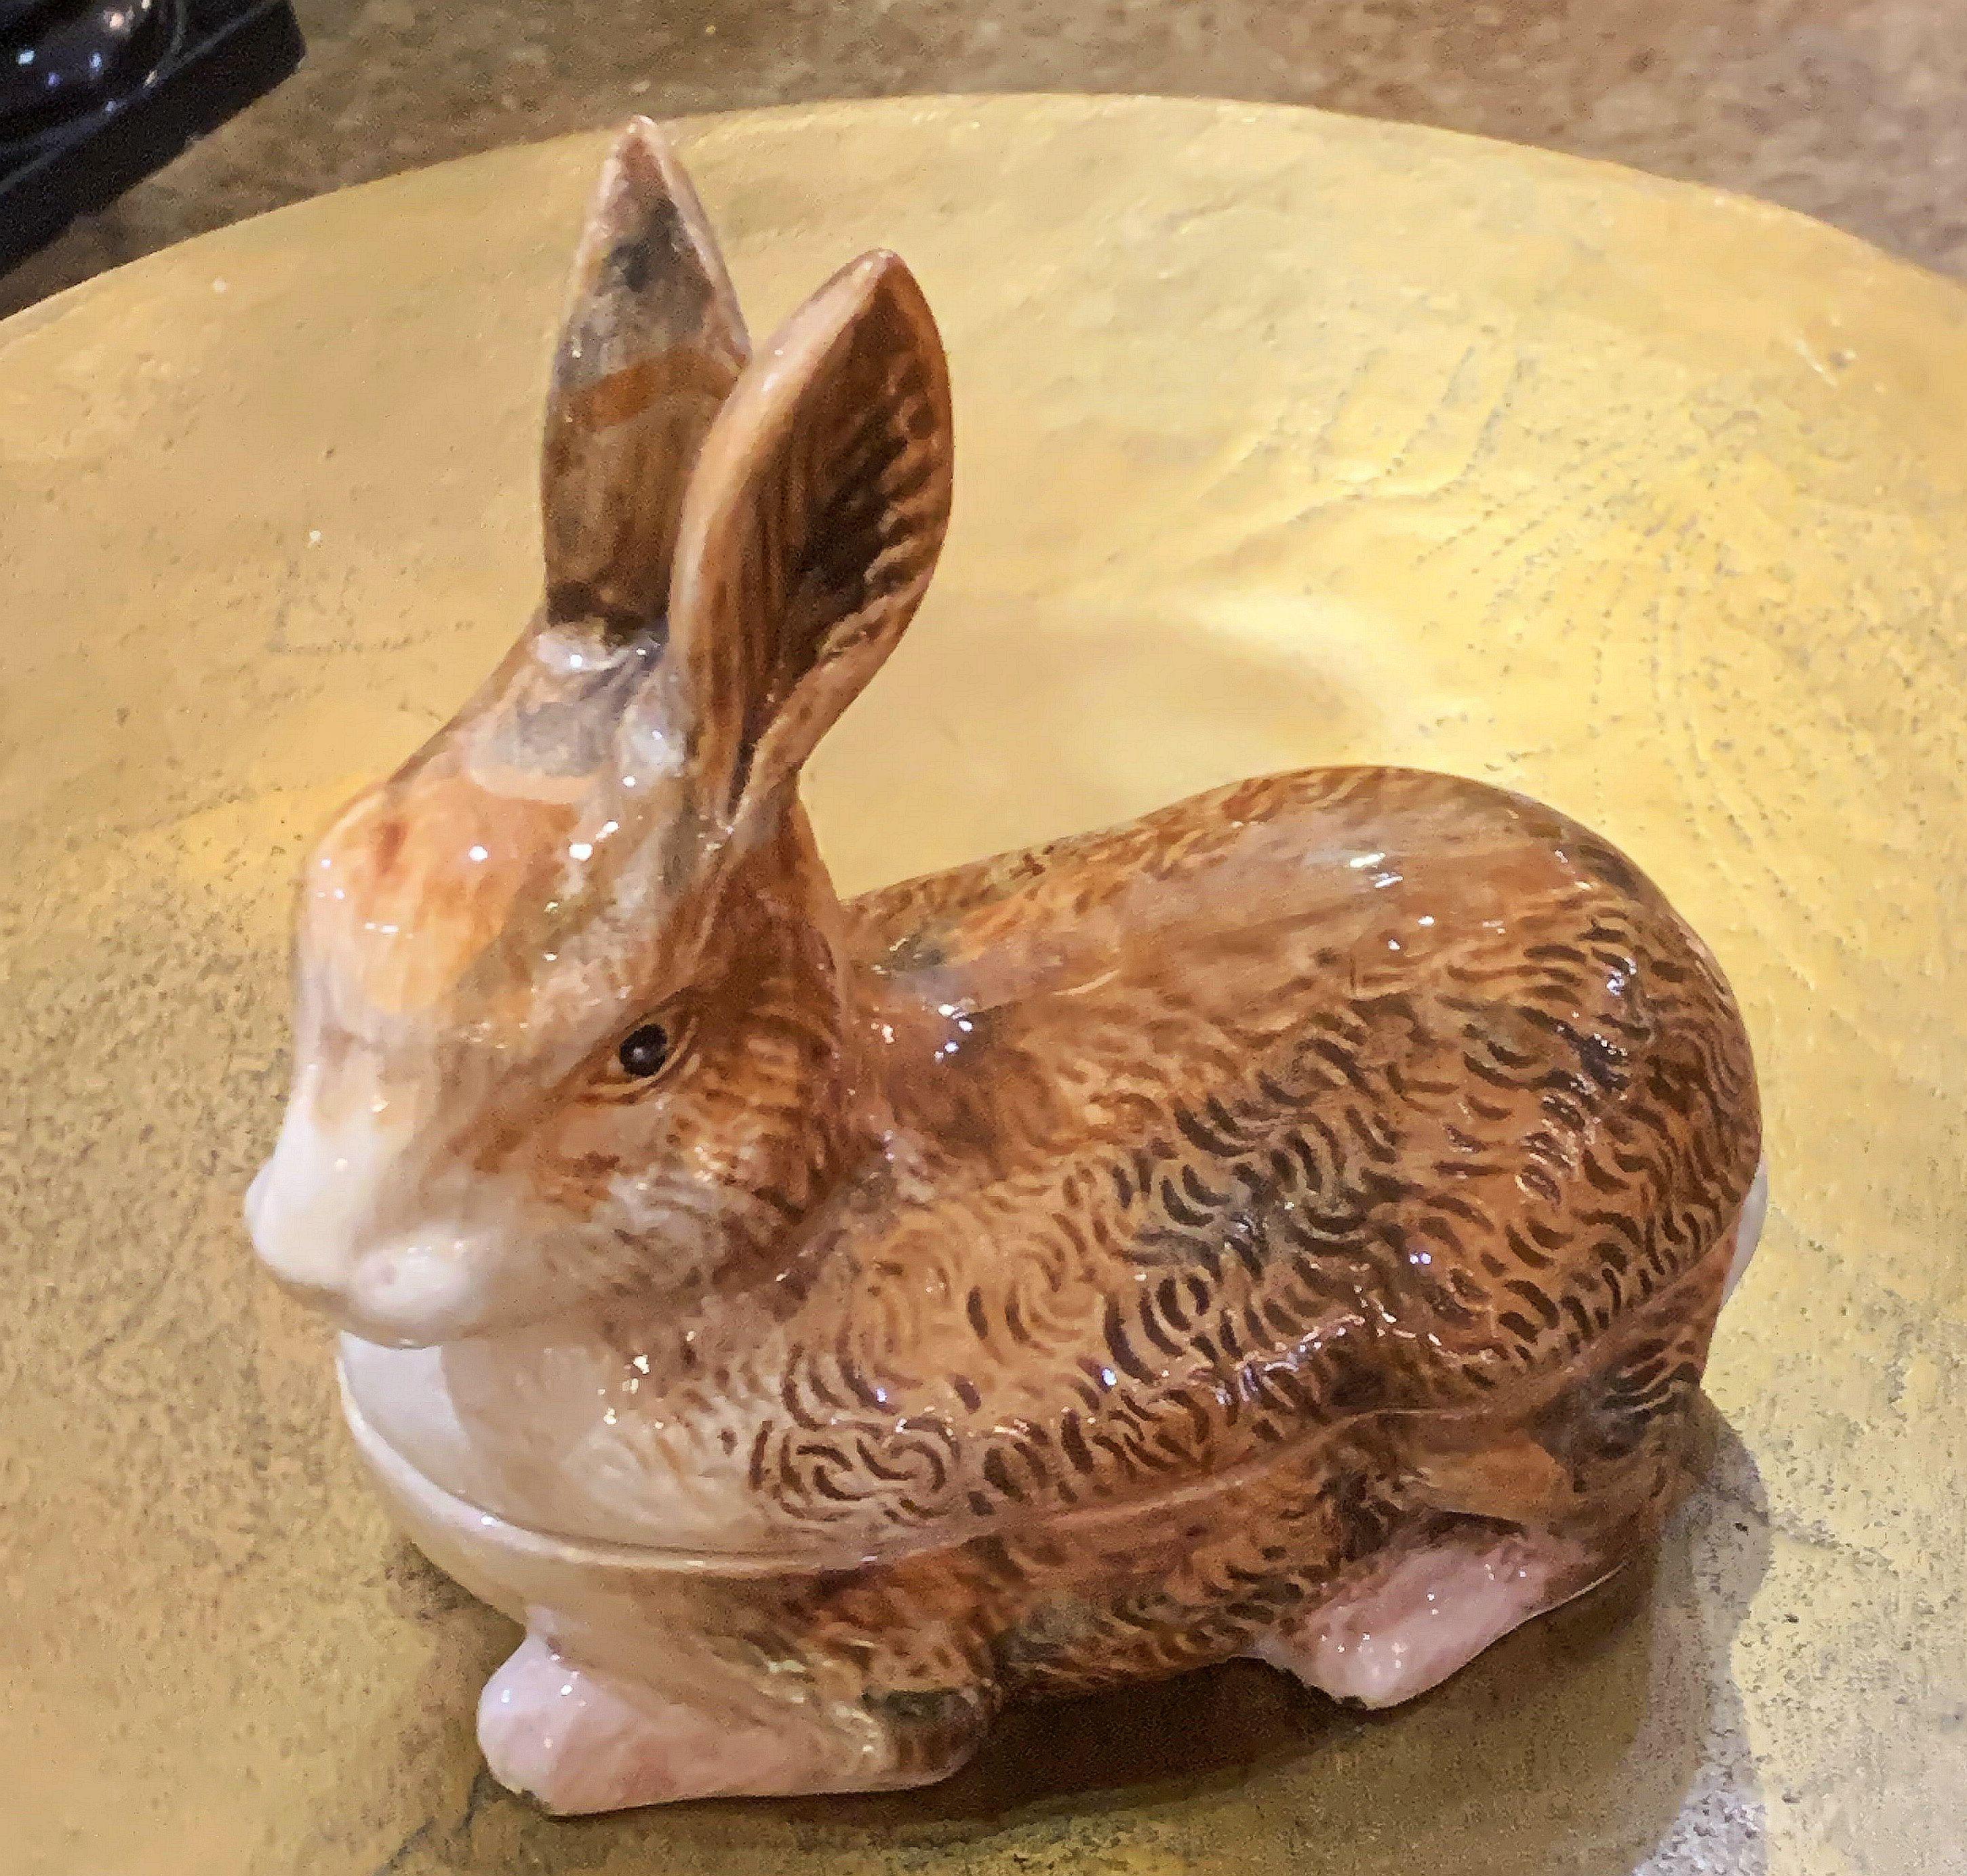 A fine French faience tureen ( pâté terrine) with lid and under tray in the shape of a rabbit by Michel Caugant.

Caugant signature on bottom.

